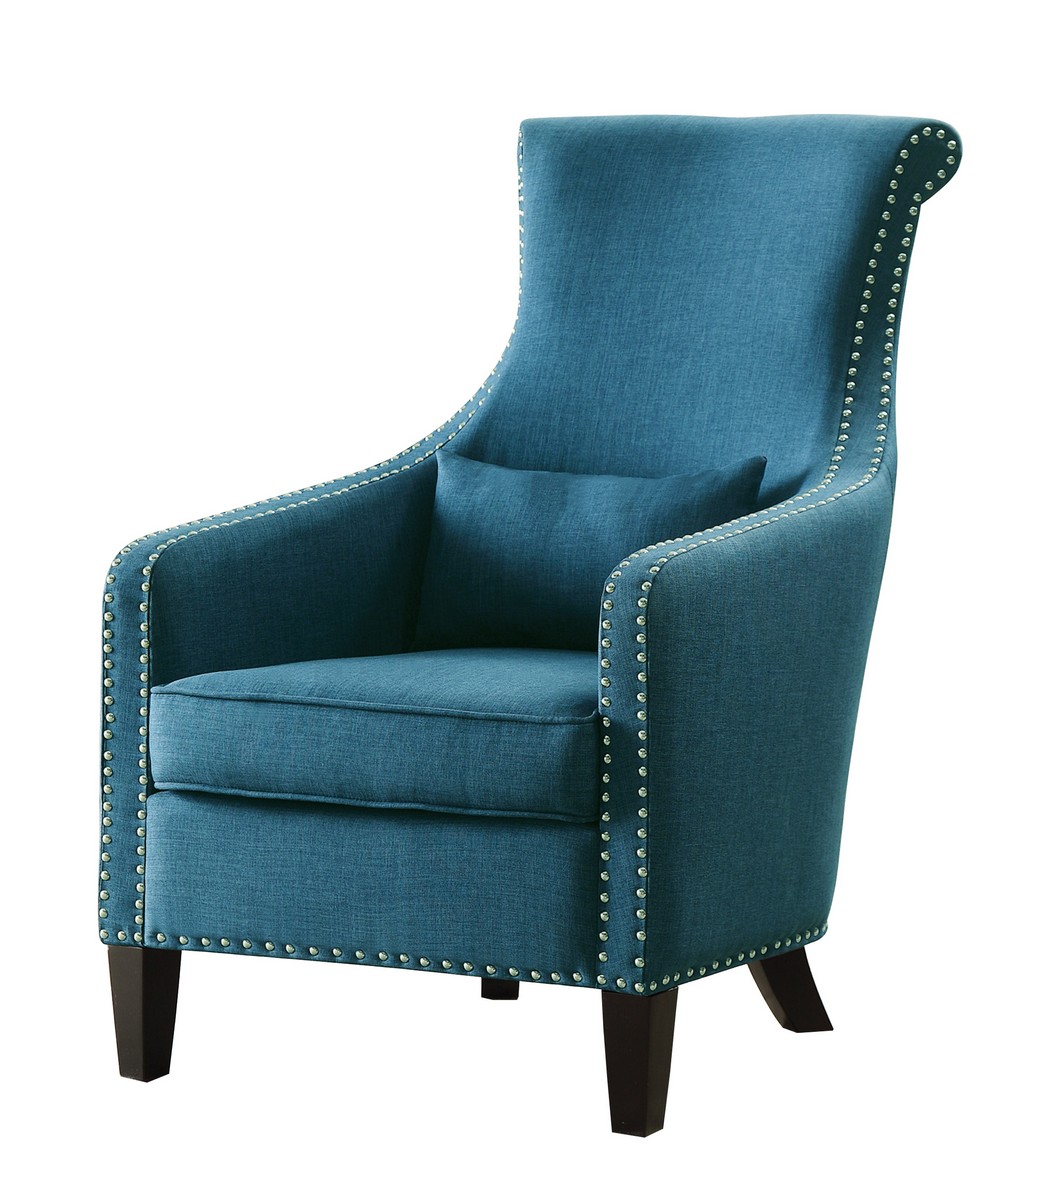 Homelegance Arles Accent Chair with 1 Kidney Pillow - Blue